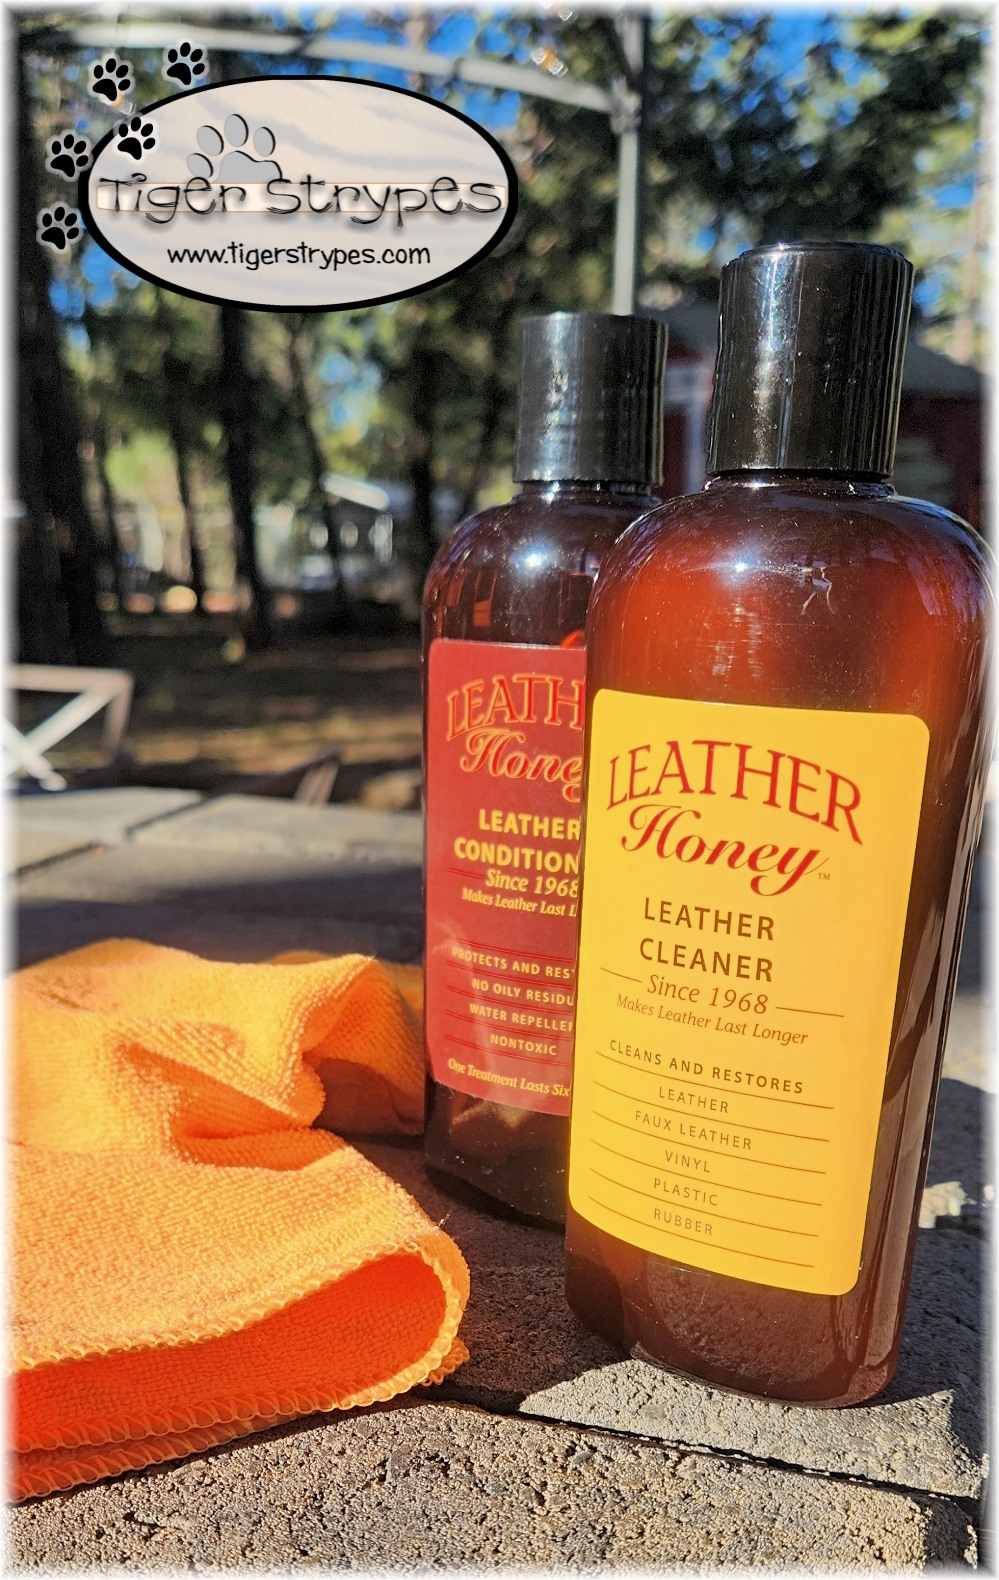 Leather Better Leather Conditioner for Furniture - Leather Cleaner and  Restoration for Leather Couches, Boots and Shoes, Bags, Saddles and Tac